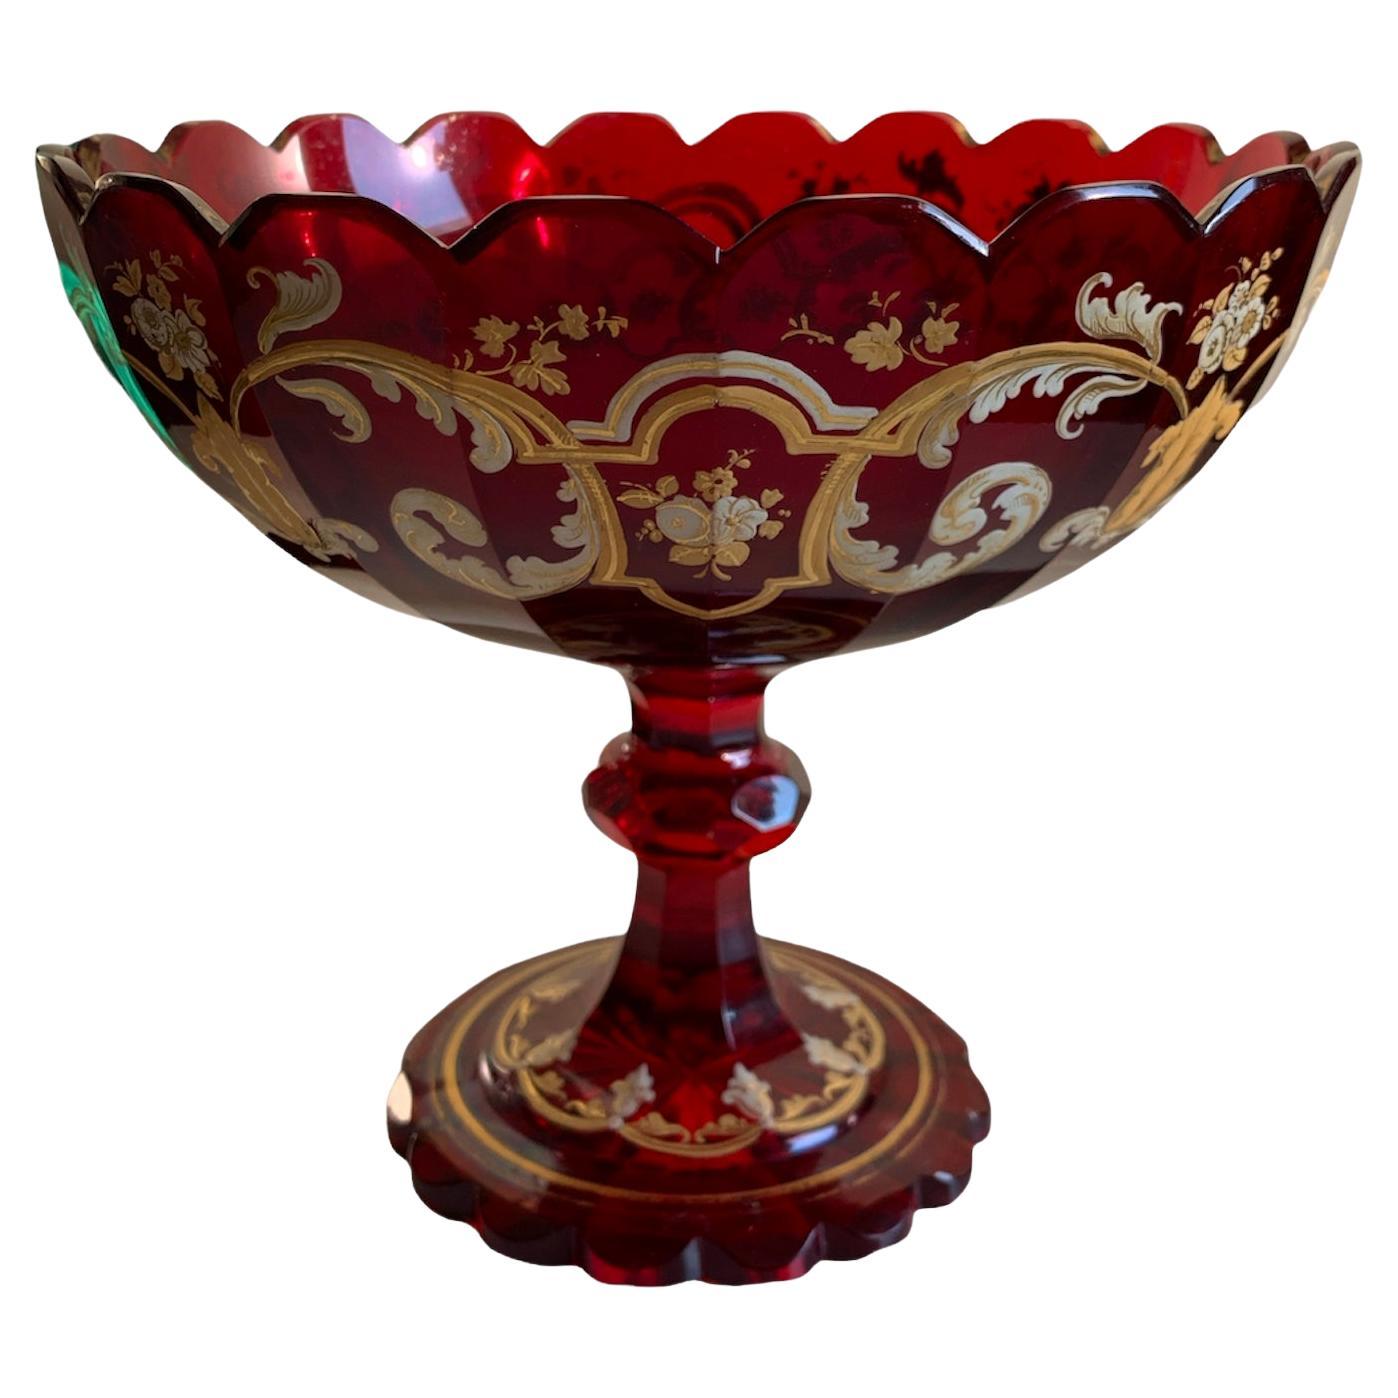 Antique Bohemian Ruby Red Enameled Glass Tazza Bowl, 19th Century